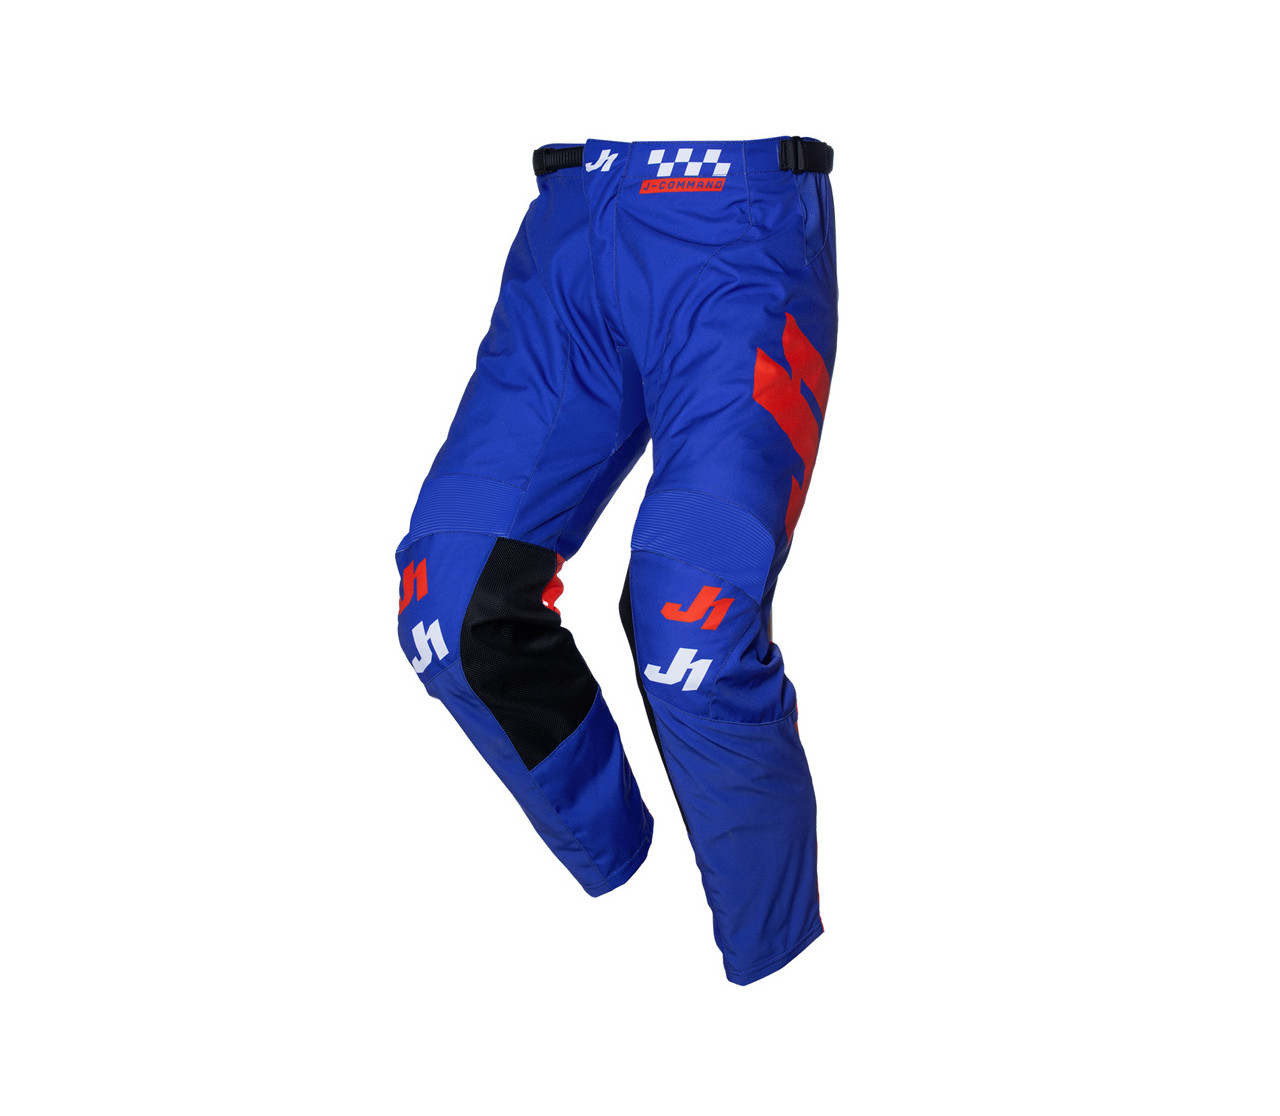 JUST1 PANTS J-COMMAND COMPETITION BLUE RED WHITE